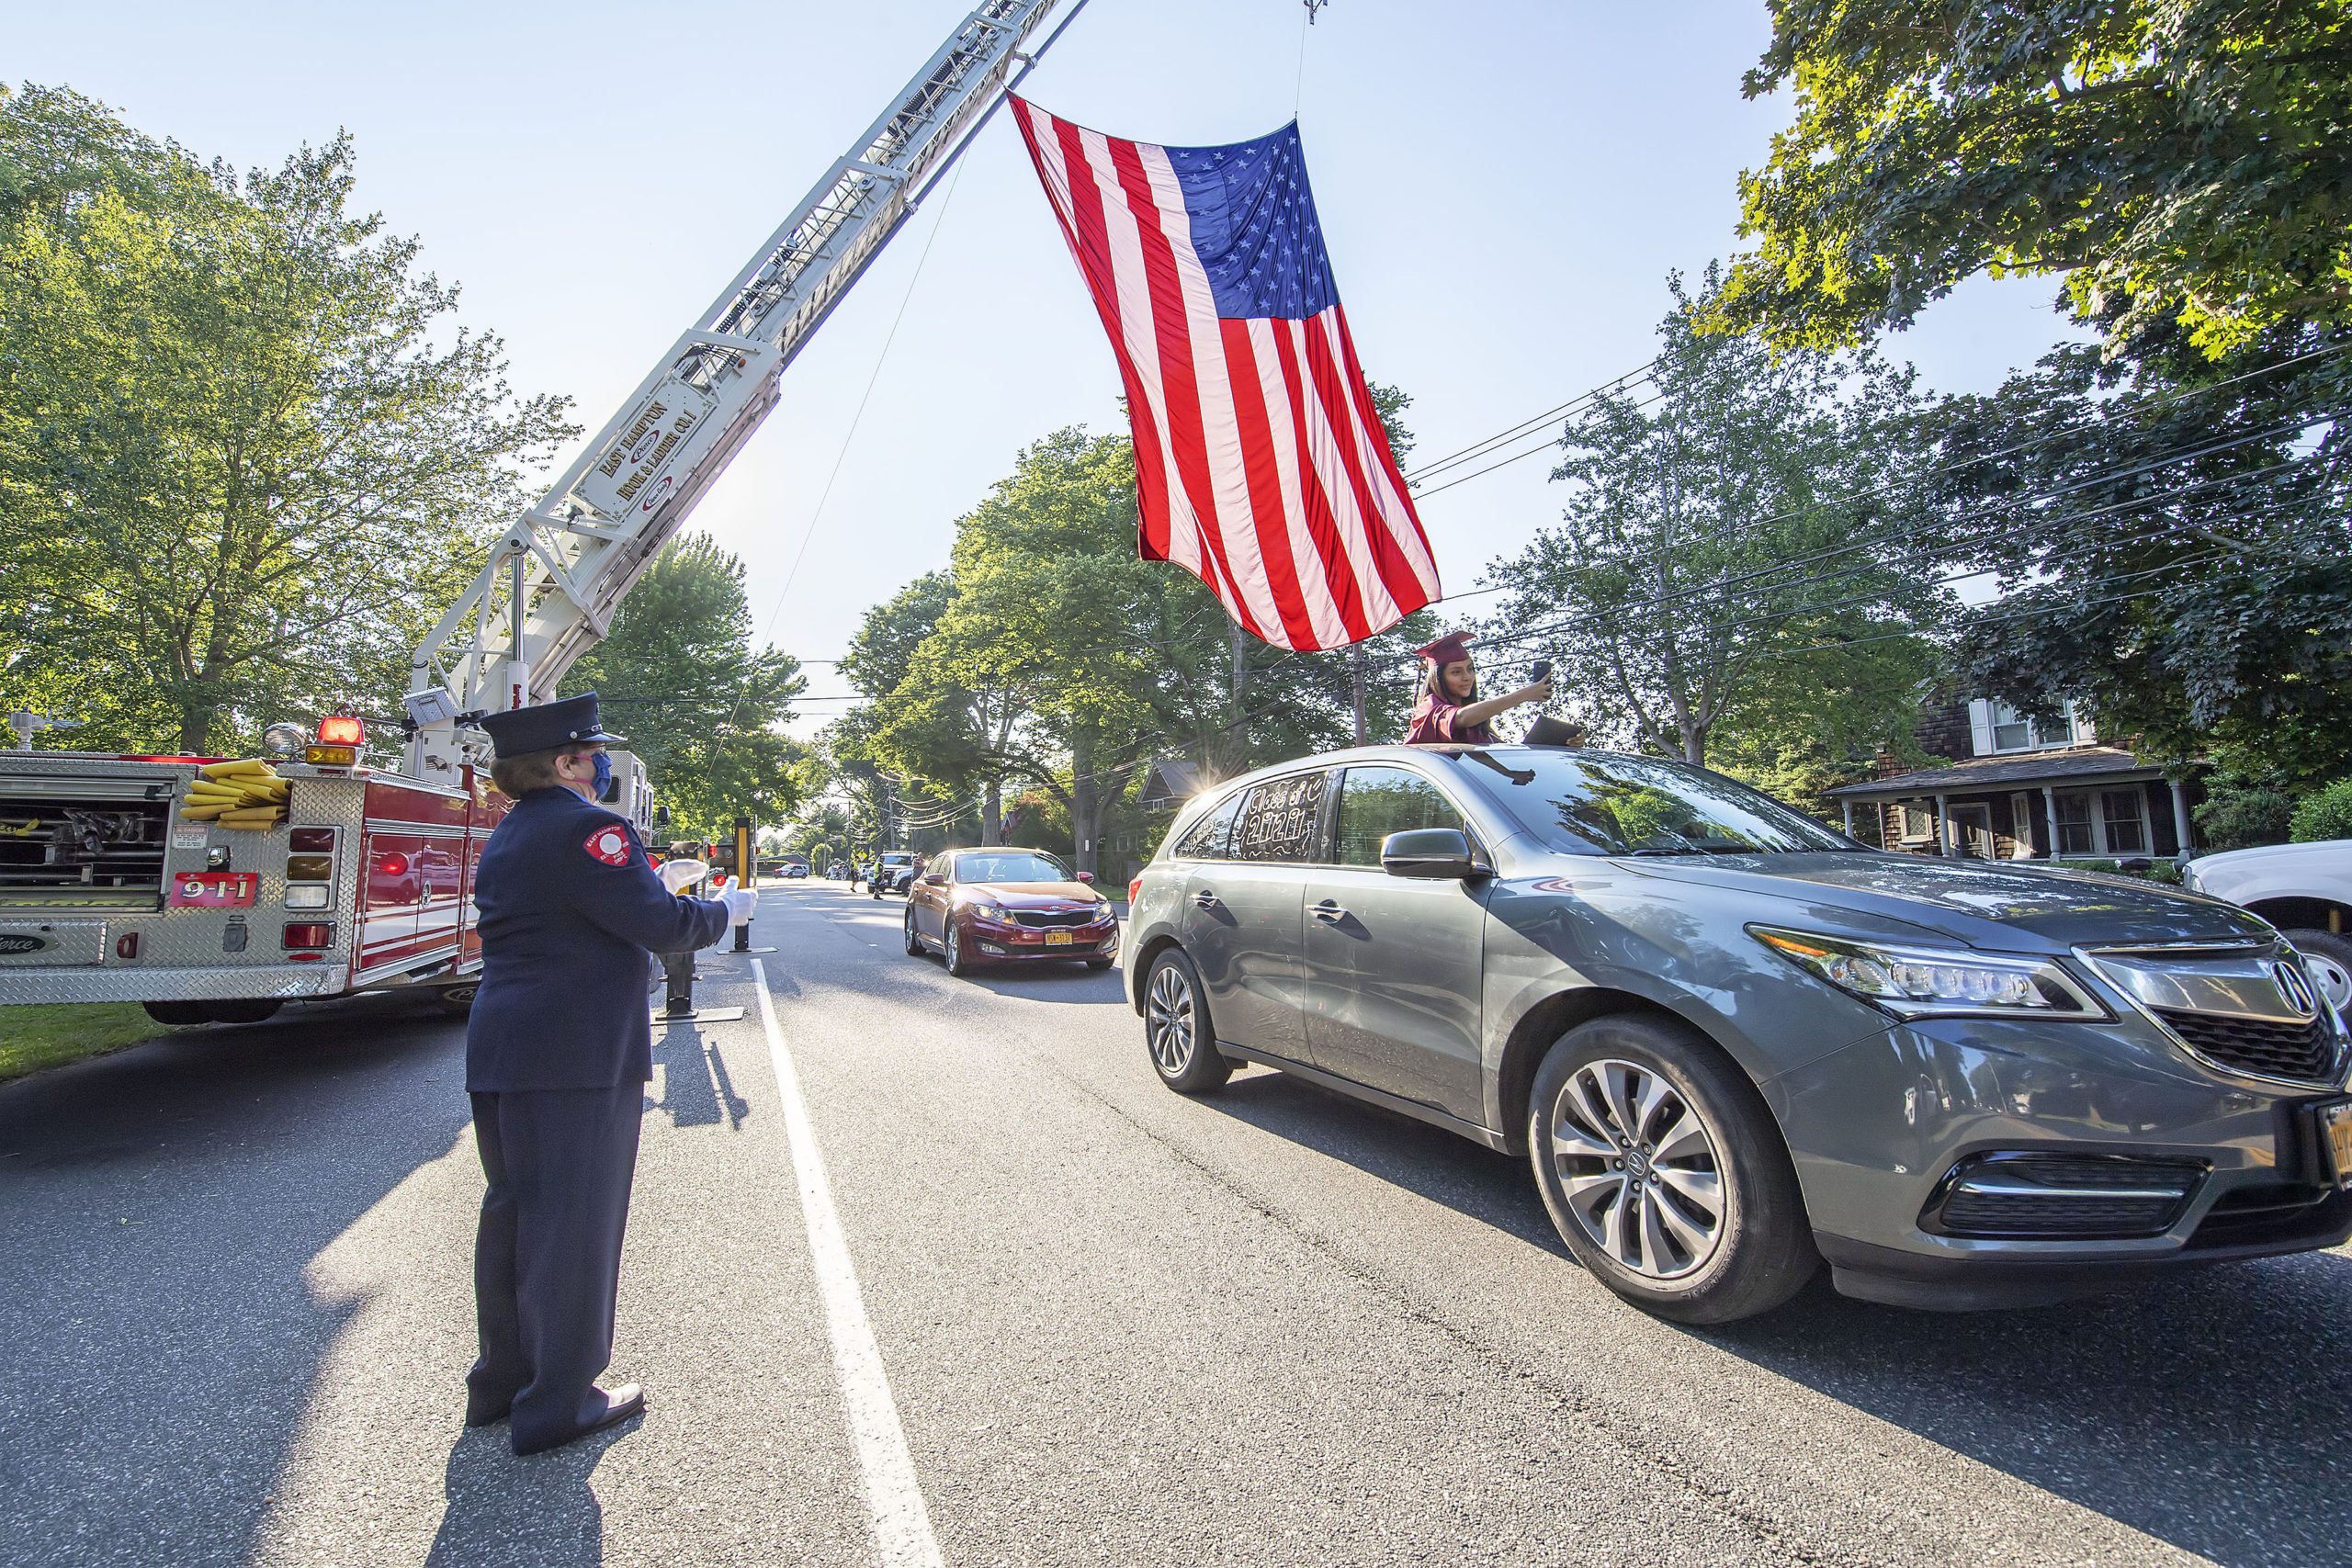 A newly-graduated East Hampton High School senior gets a round of applause from East Hampton Fire Department Fire Police member Joan Jacobs as she photographs herself passing underneath a large American flag hoisted by EHFD Hool & Ladder Co.#1 in honor on the graduates on Newtown Lane following the 2020 graduation ceremony at the East Hampton High School on Friday.